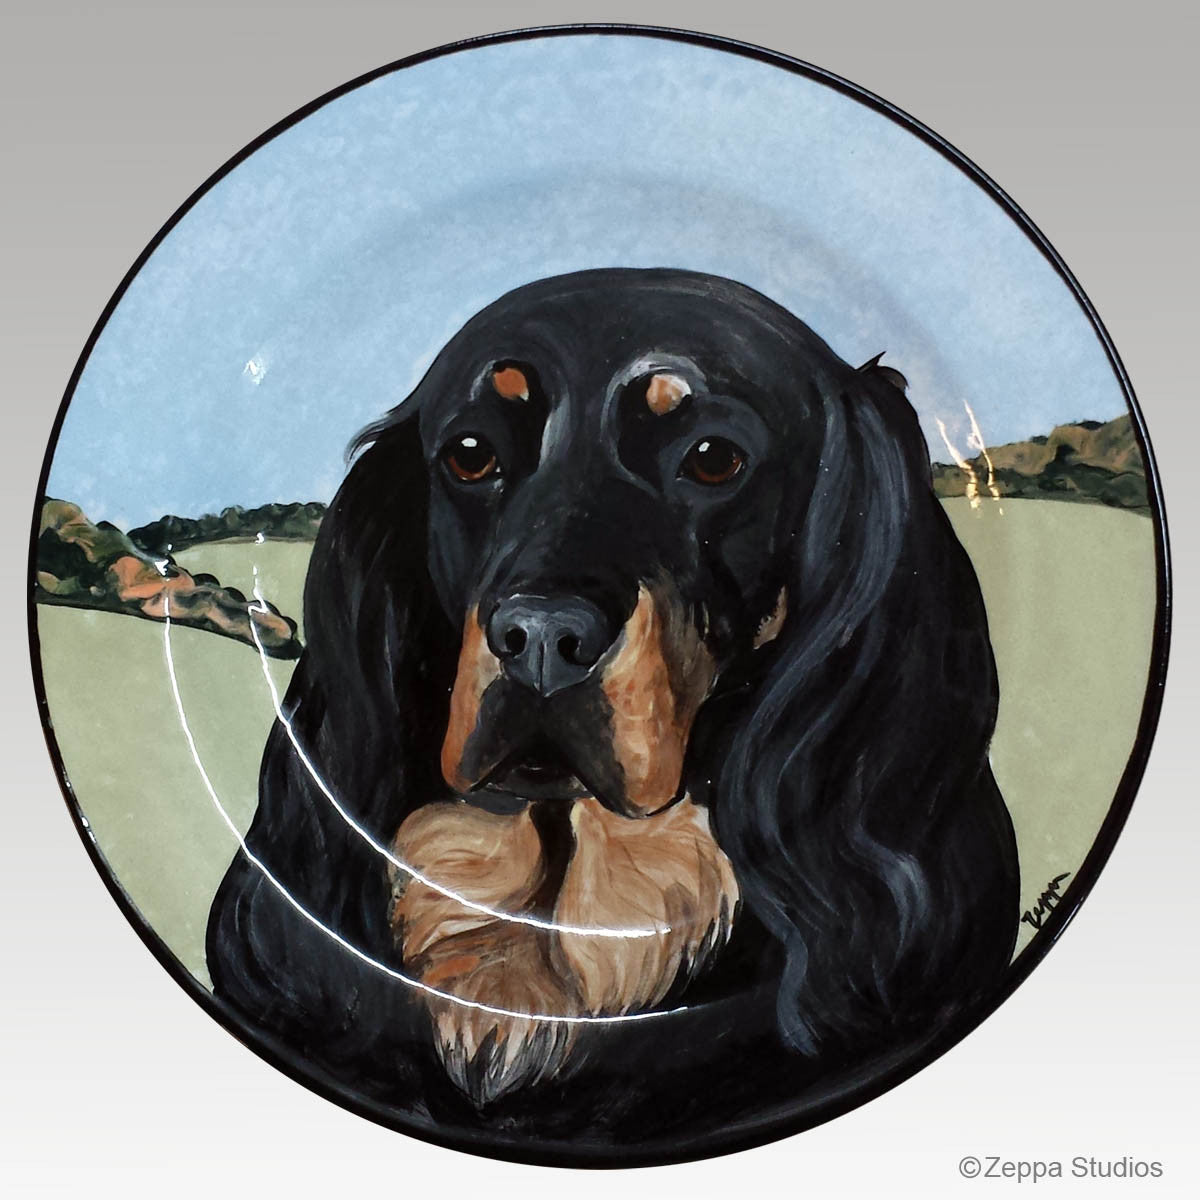 Gallery Style Hand Painted 11 inch Plate - Gordon Setter